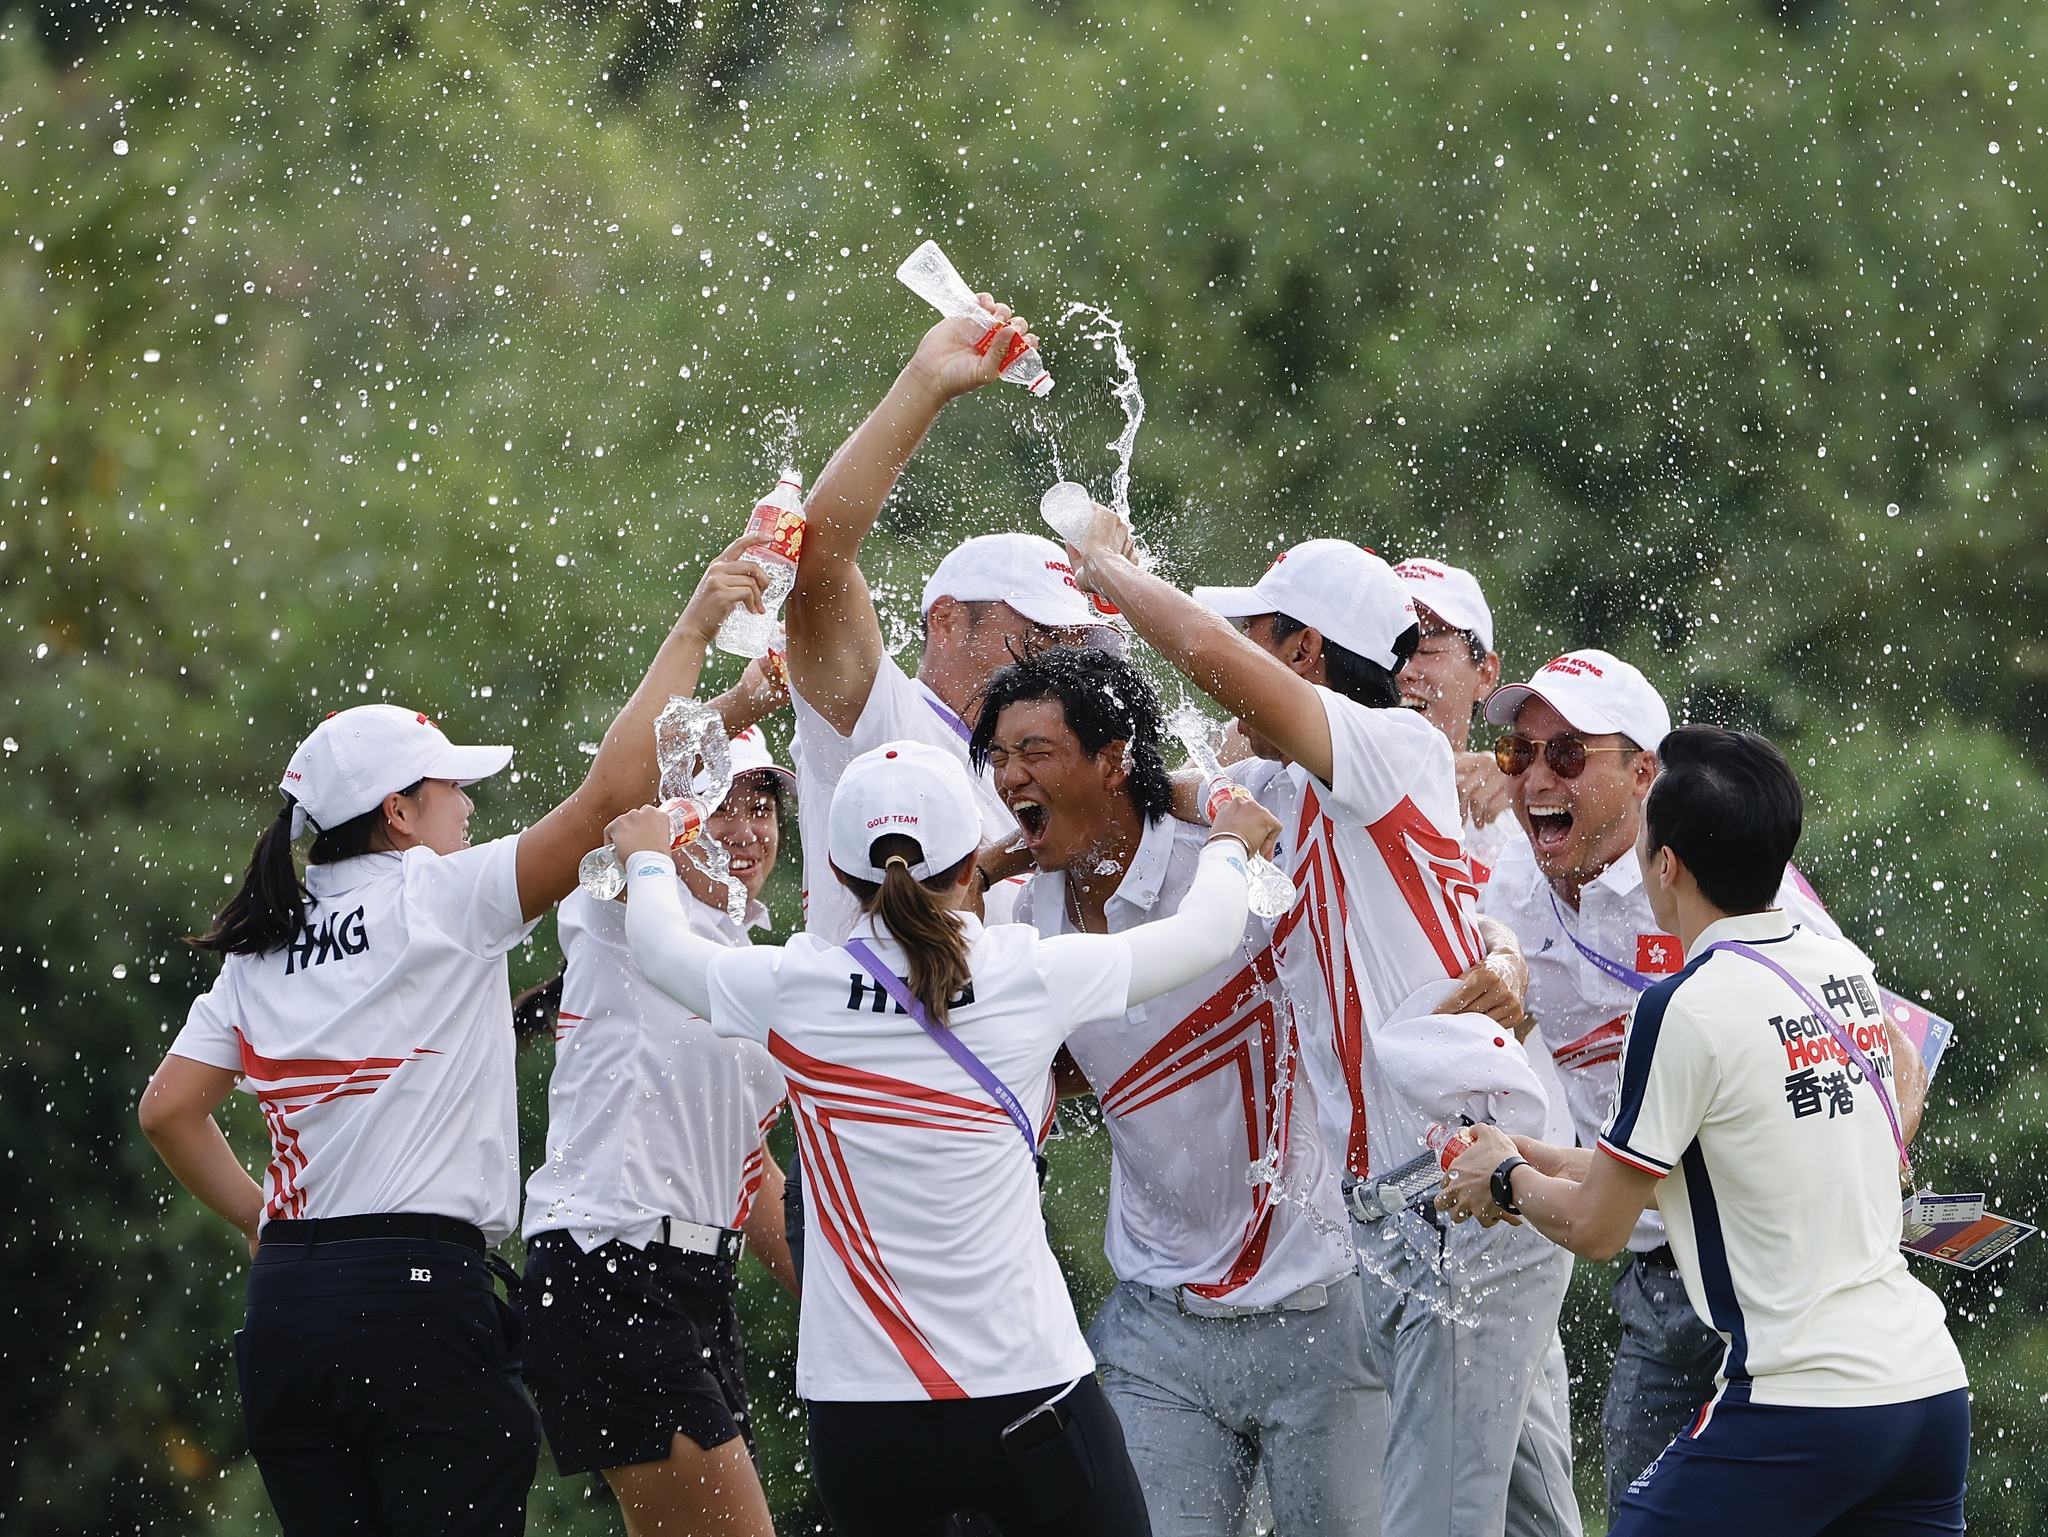 Taichi Kho wins the city’s first Asian Games gold medal in men’s individual golf, and he also takes bronze in the team event with Matthew Cheung, Jason Hak and Terrence Ng.